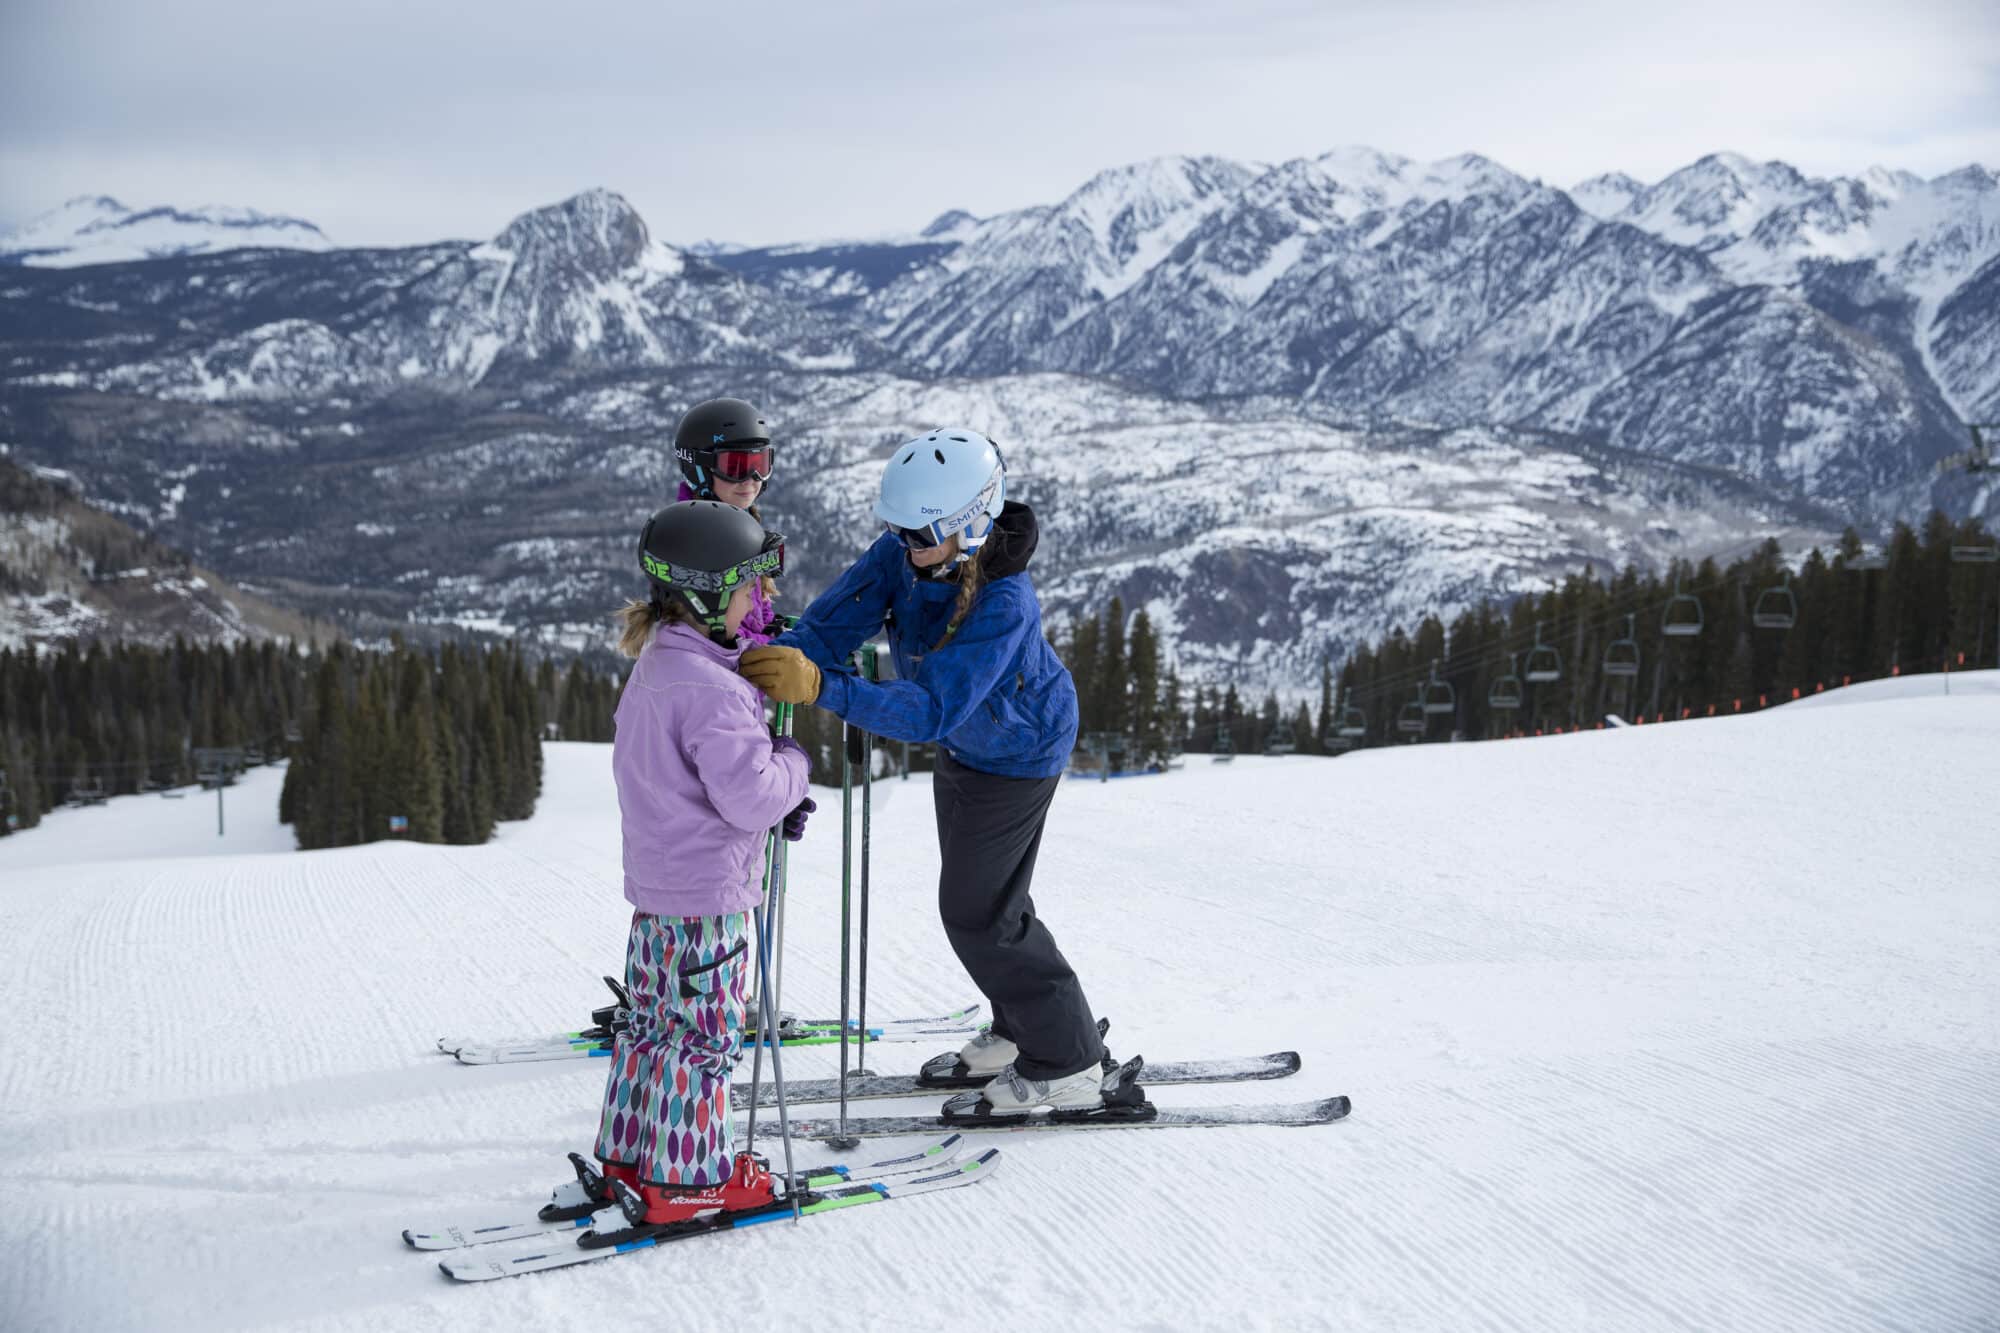 Instructor helps young student bundle up before heading down the mountain